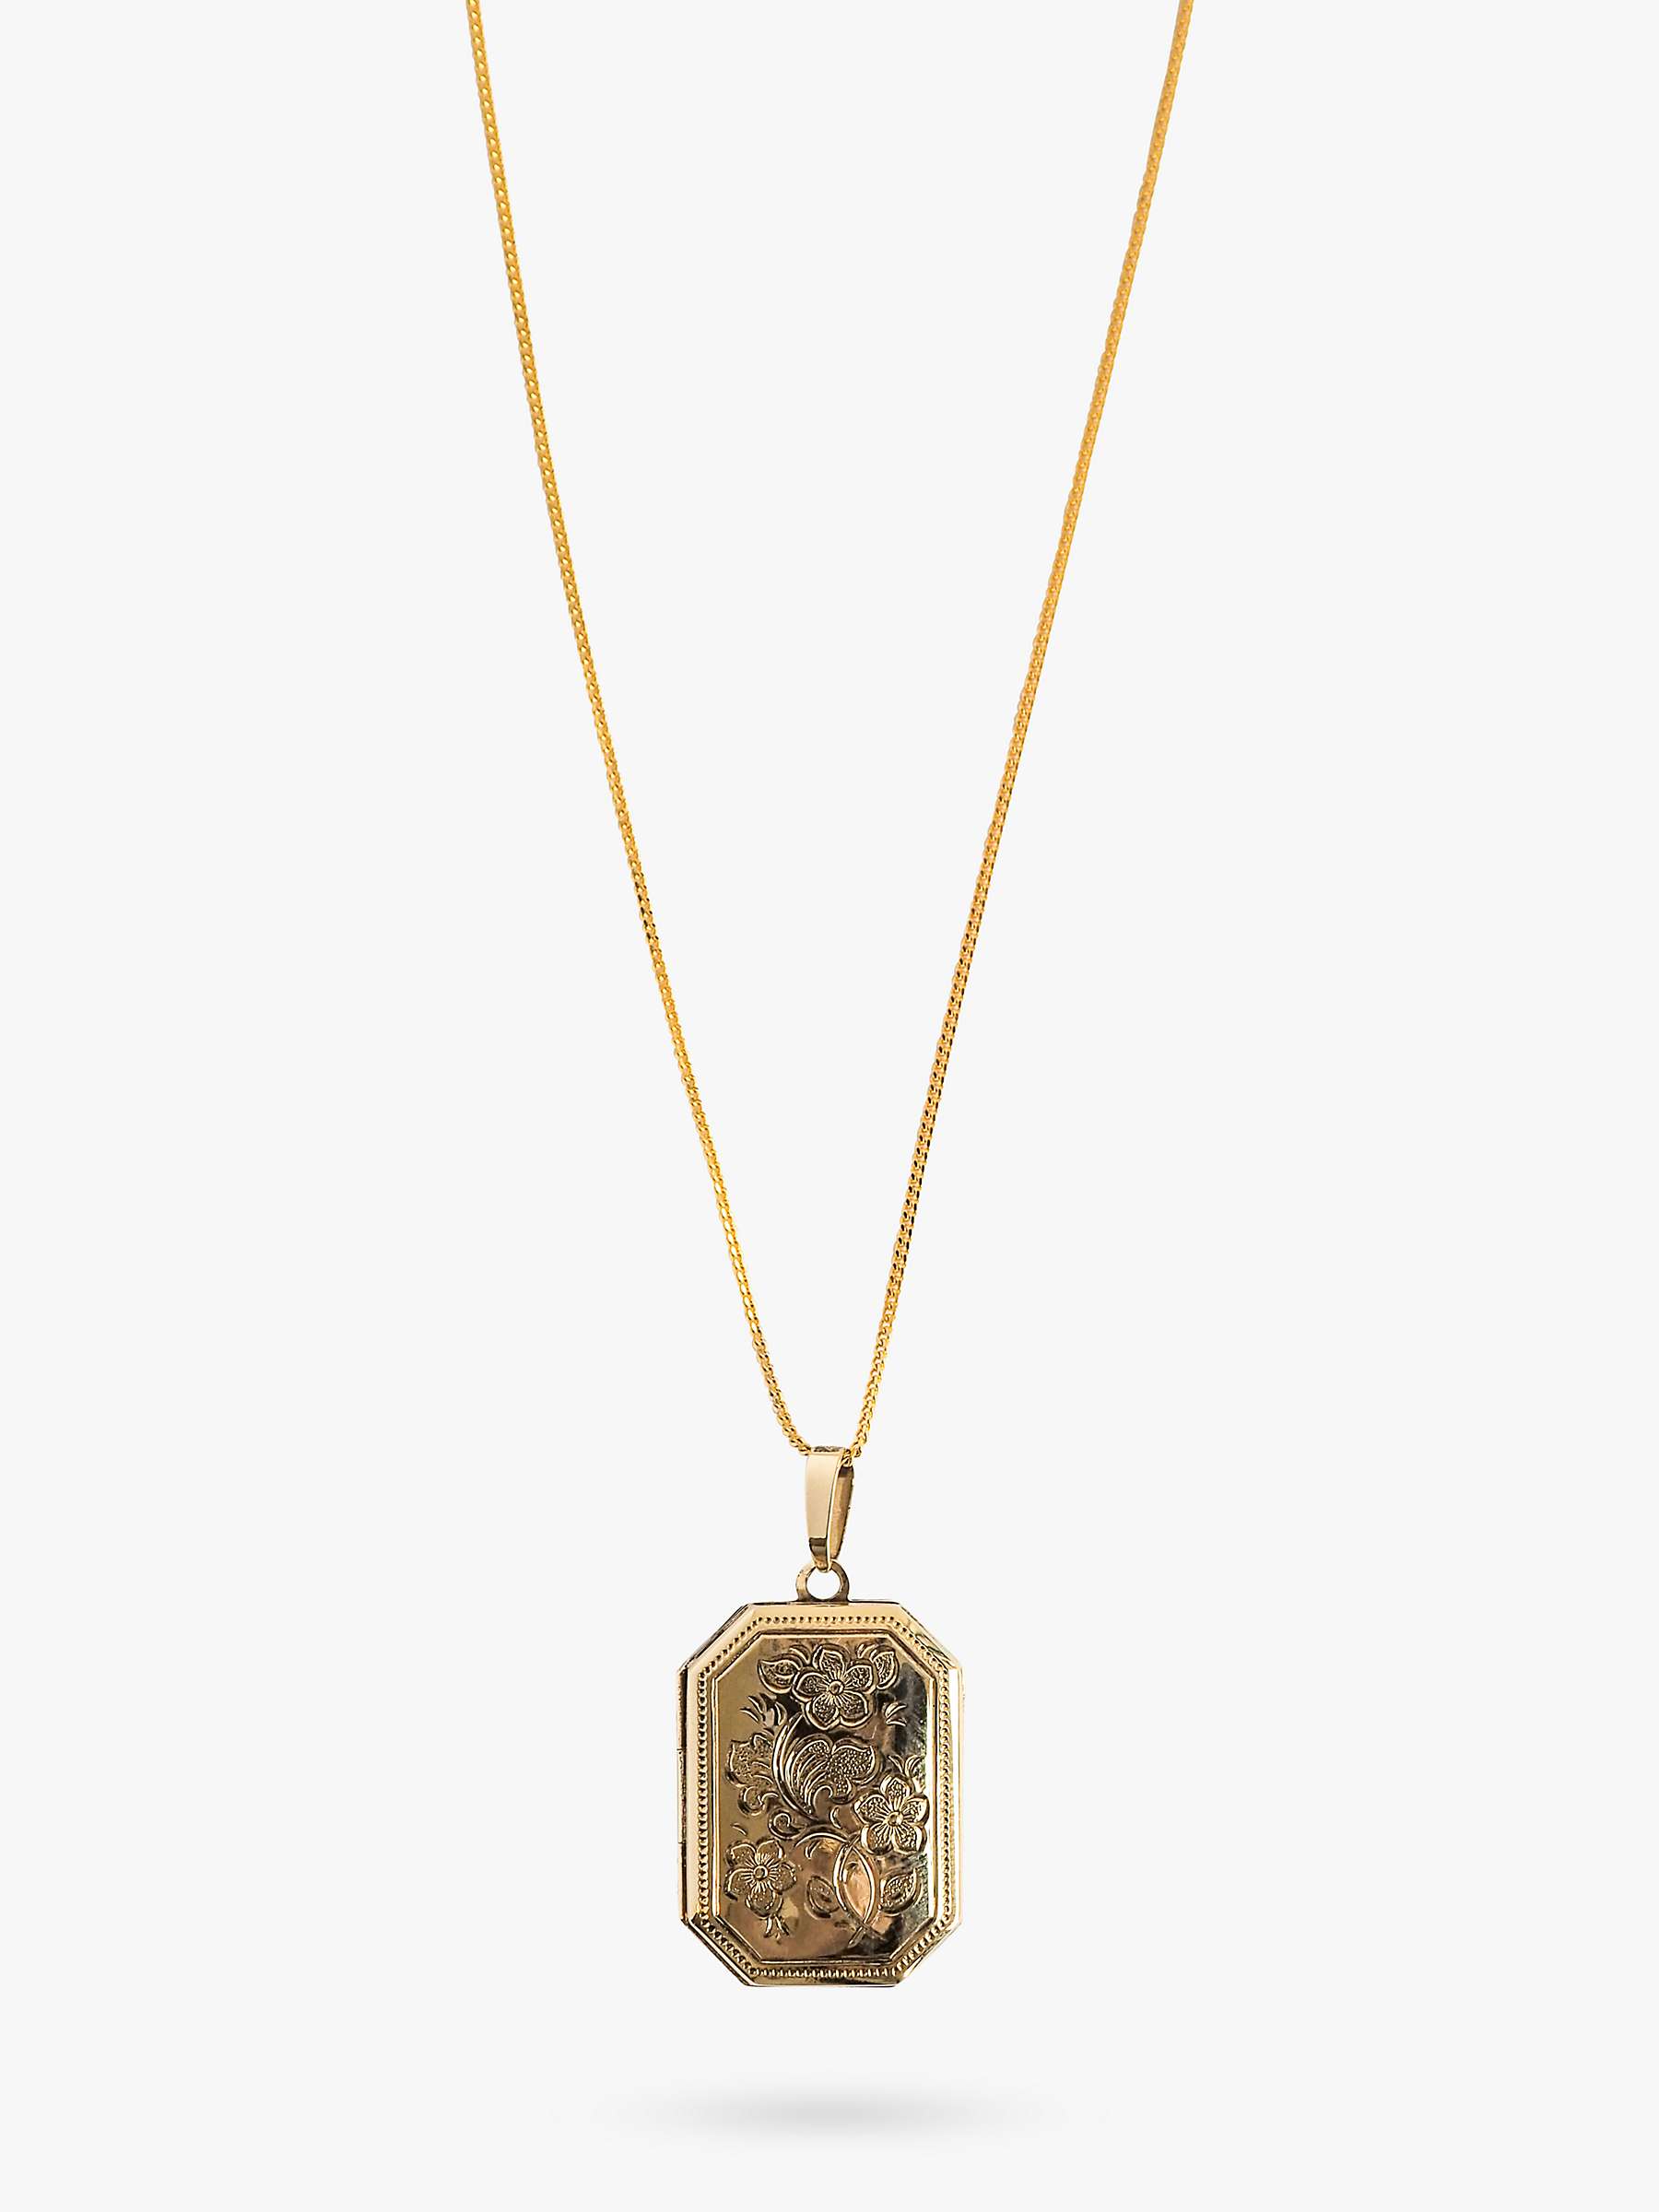 Buy L & T Heirlooms Second Hand 9ct Yellow Gold Floral Engraved Locket Pendant Necklace, Gold Online at johnlewis.com